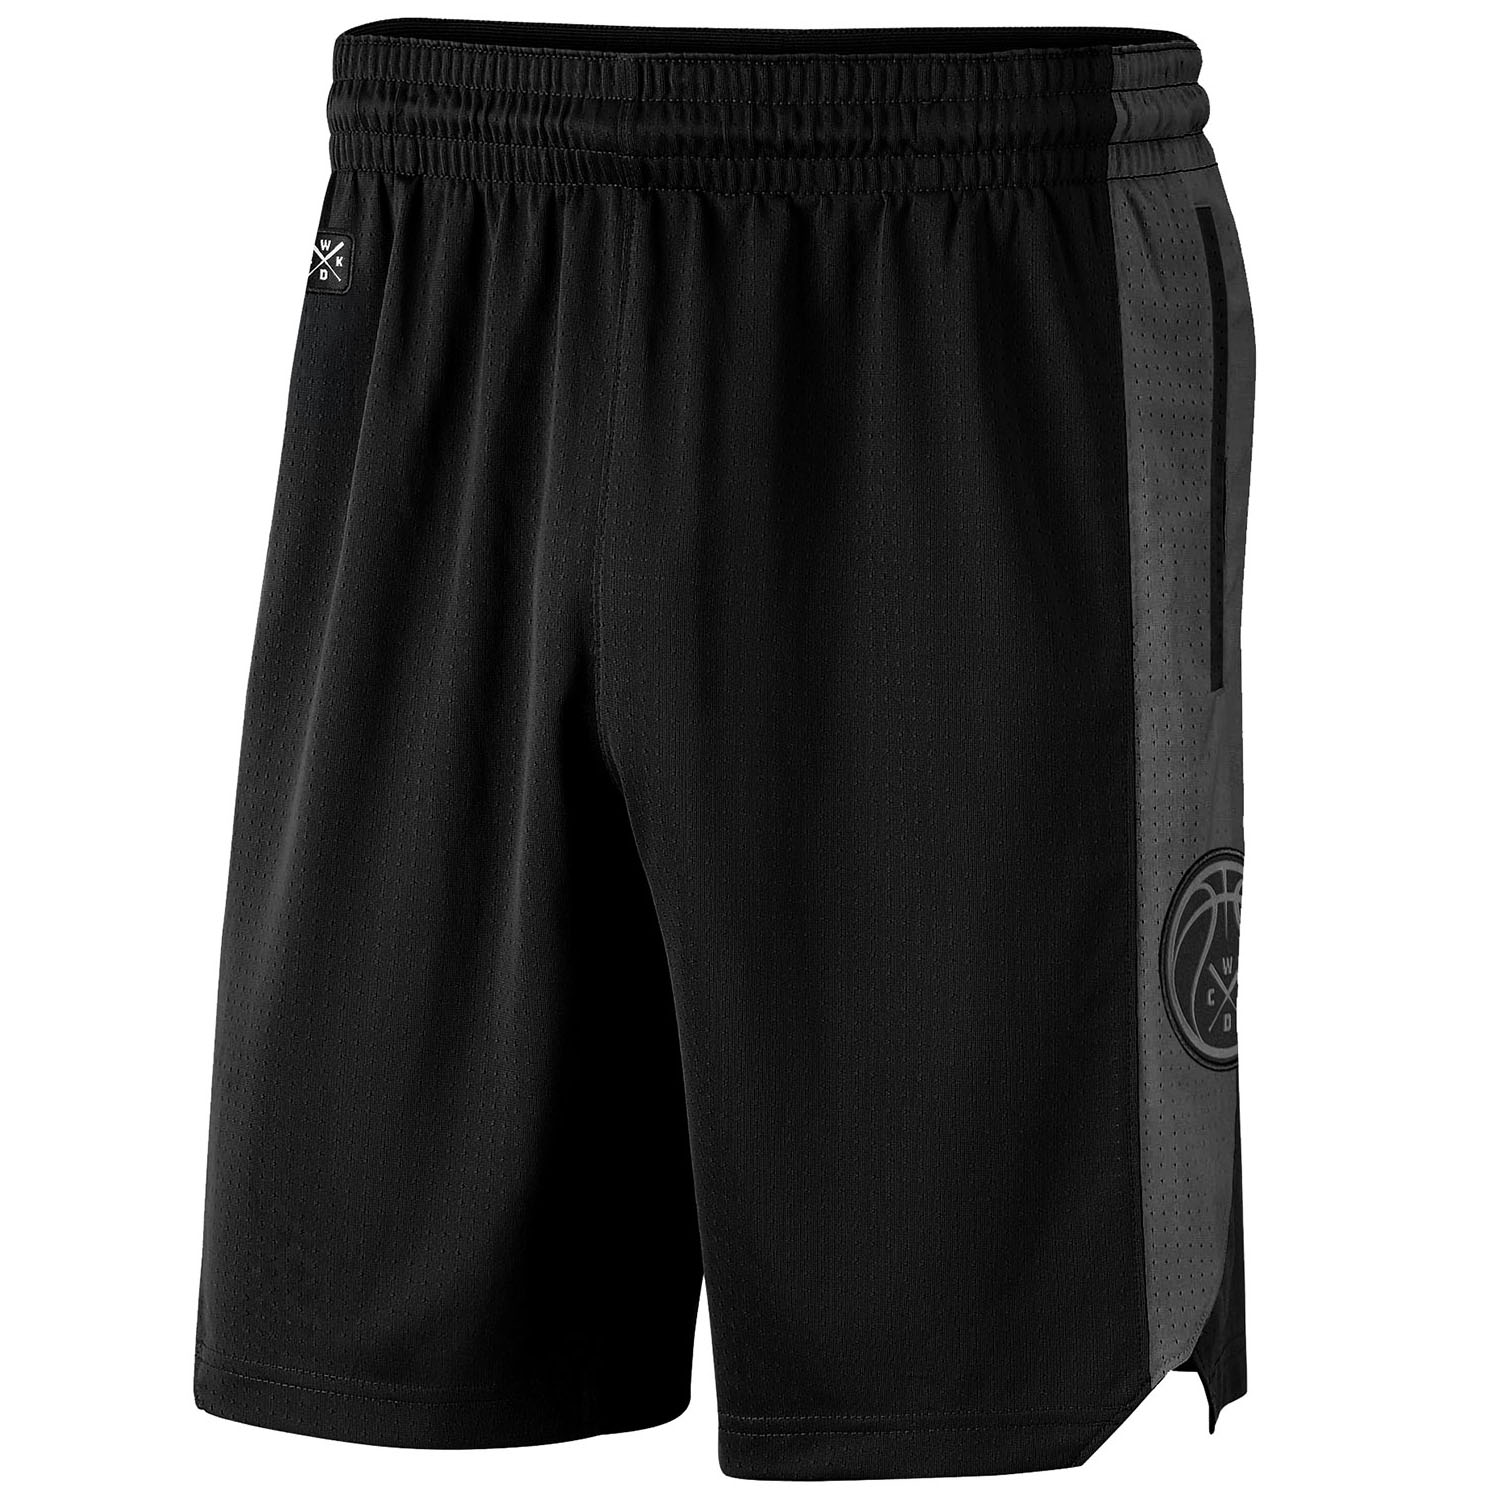 WICKED ONE Fitness Shorts, Playoffs, black, S